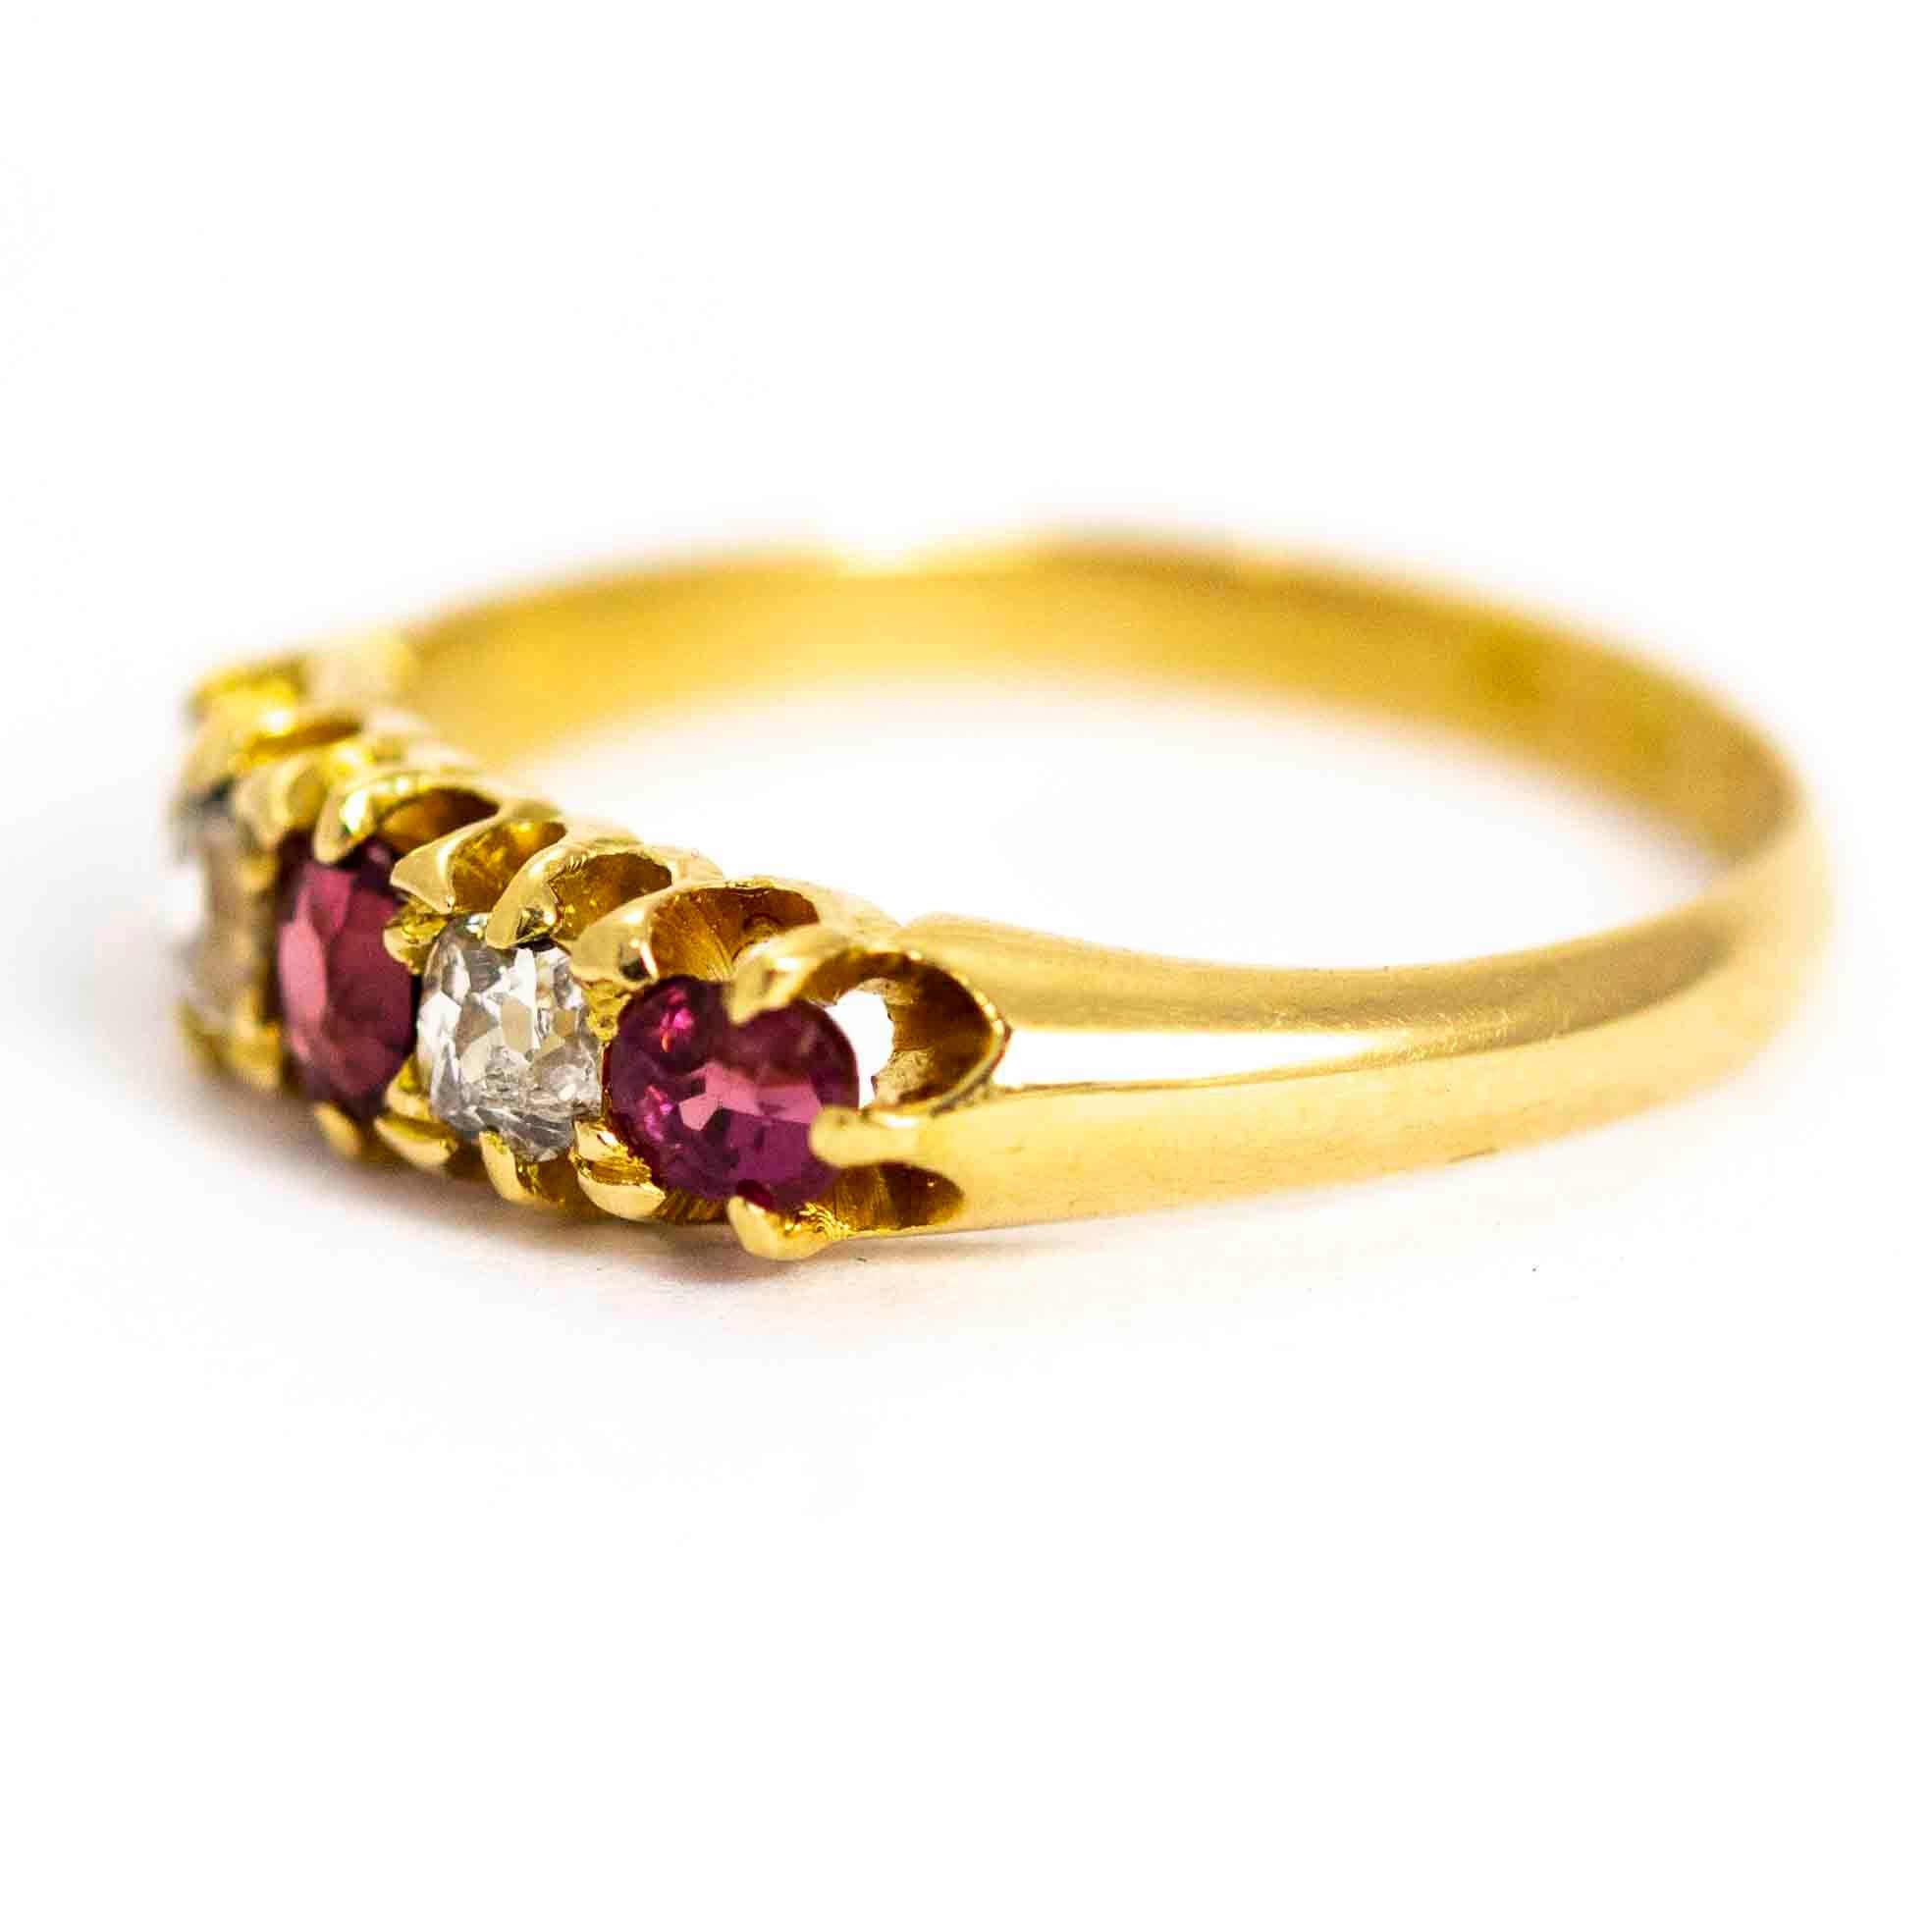 A superb vintage five-stone ring set with rubies and diamonds. The central ruby measures approximately 18 points, and is flanked by a pair of beautiful 15 point diamonds. The rubies at the ends of the row measure approximately 12 points each.